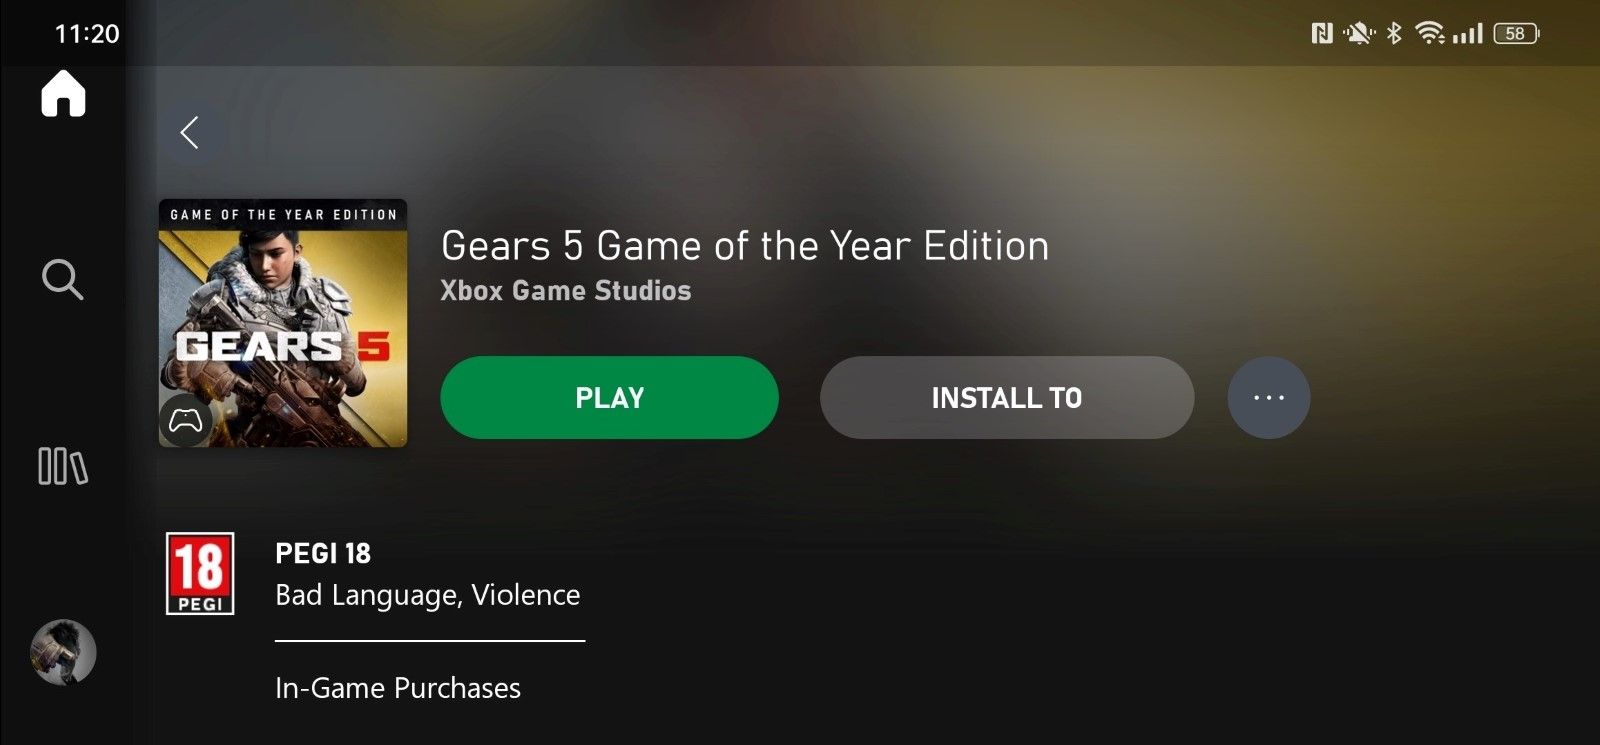 Screenshot of the Xbox Game Pass app on mobile highlighting the Gears 5 Game of the Year Edition listing